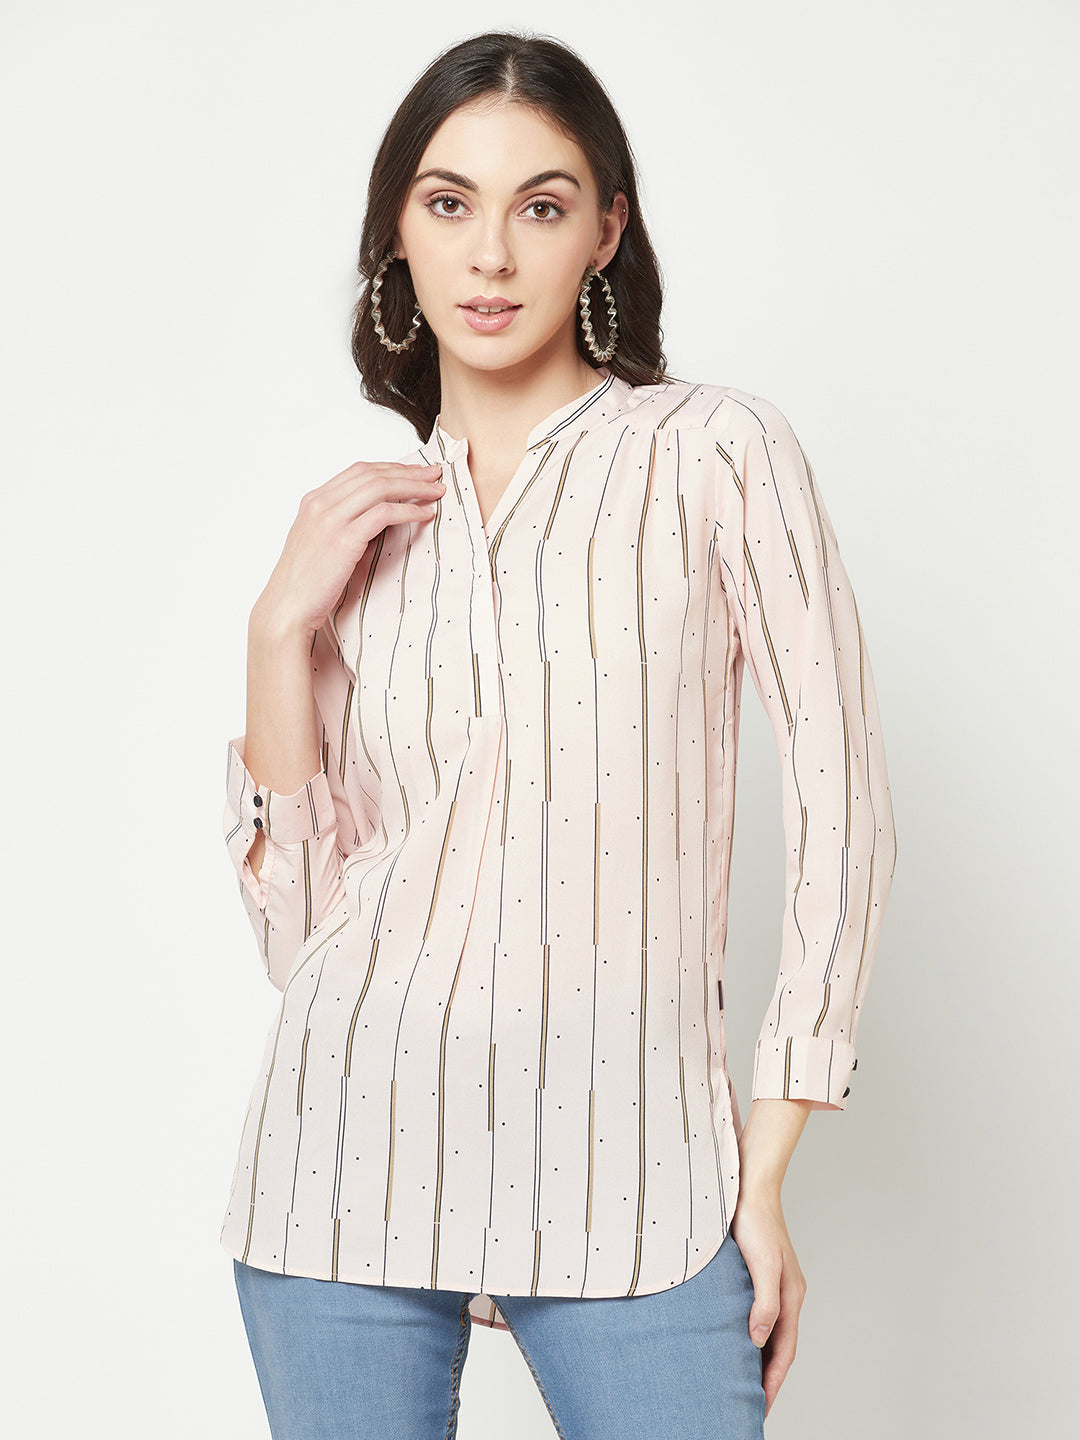  Pink Printed Top With Side Slits